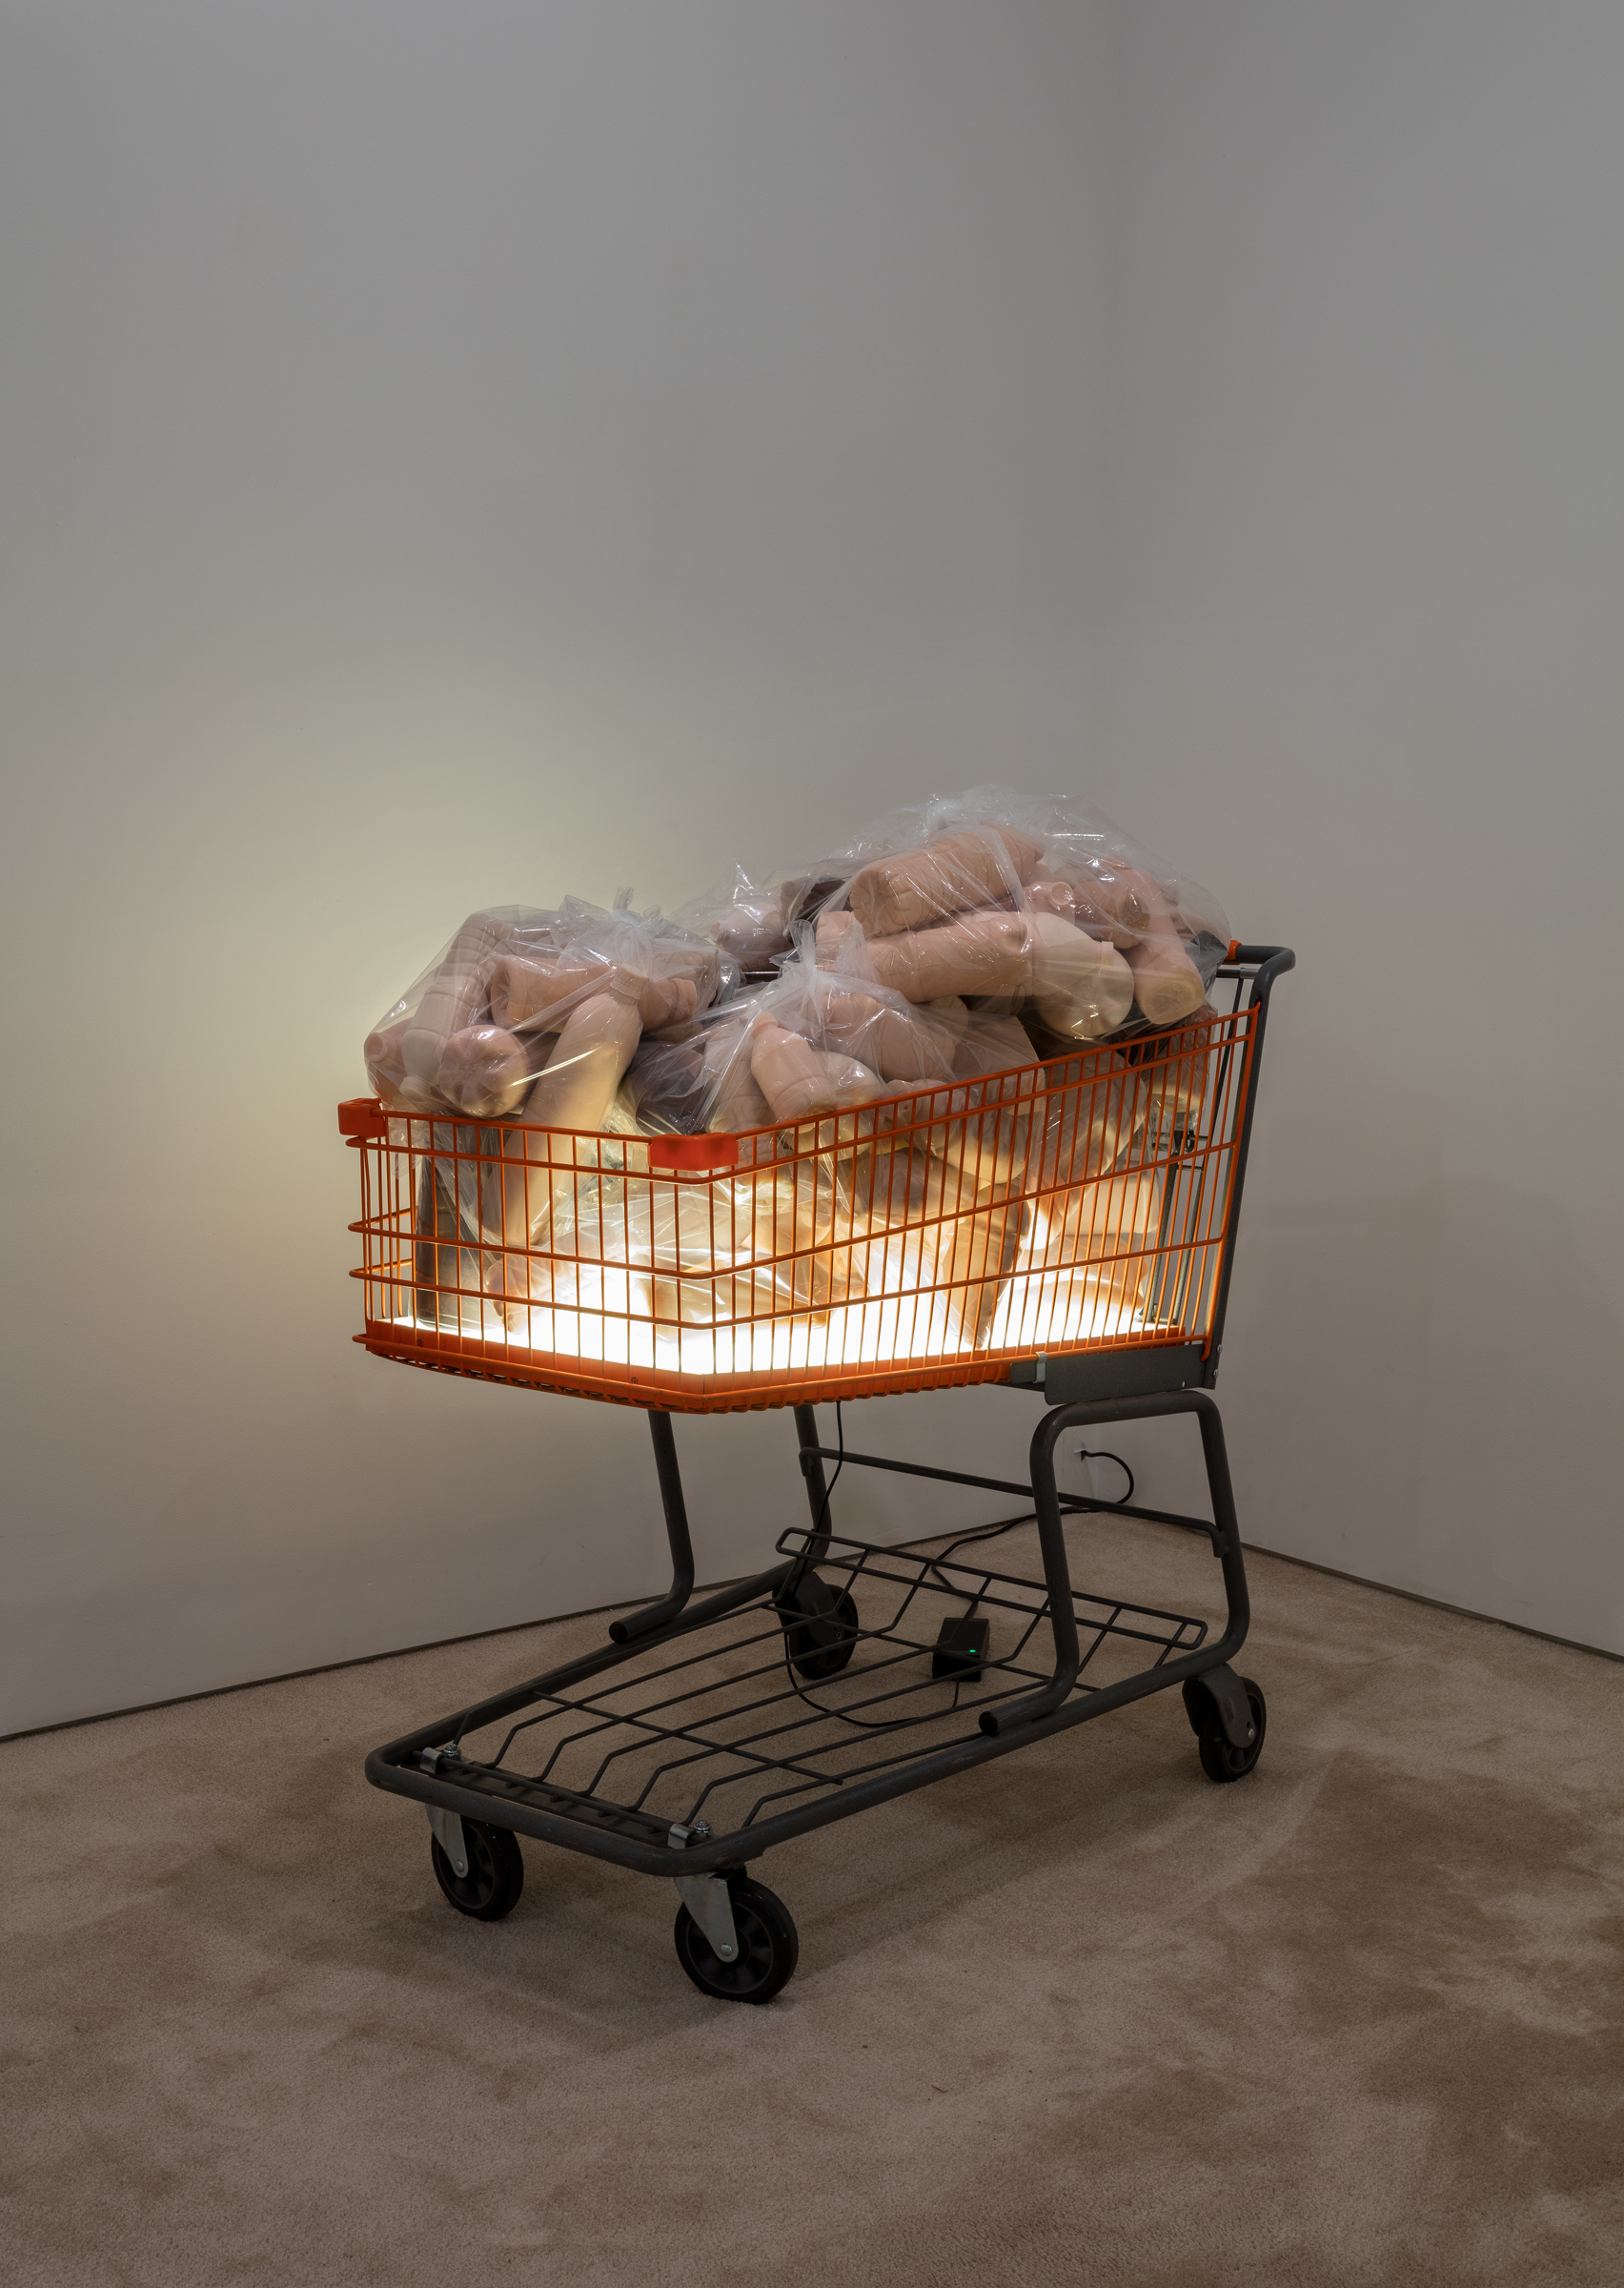 Photography of installation, shopping cart full of cast silicone tube-like objects tied up in clear polyethylene bags. Emanating underneath the bags in the cart, is an angelic, soft glow of warm light. The installation is set in a corner in front of a bare light, gray-white wall, and a light tan carpet.